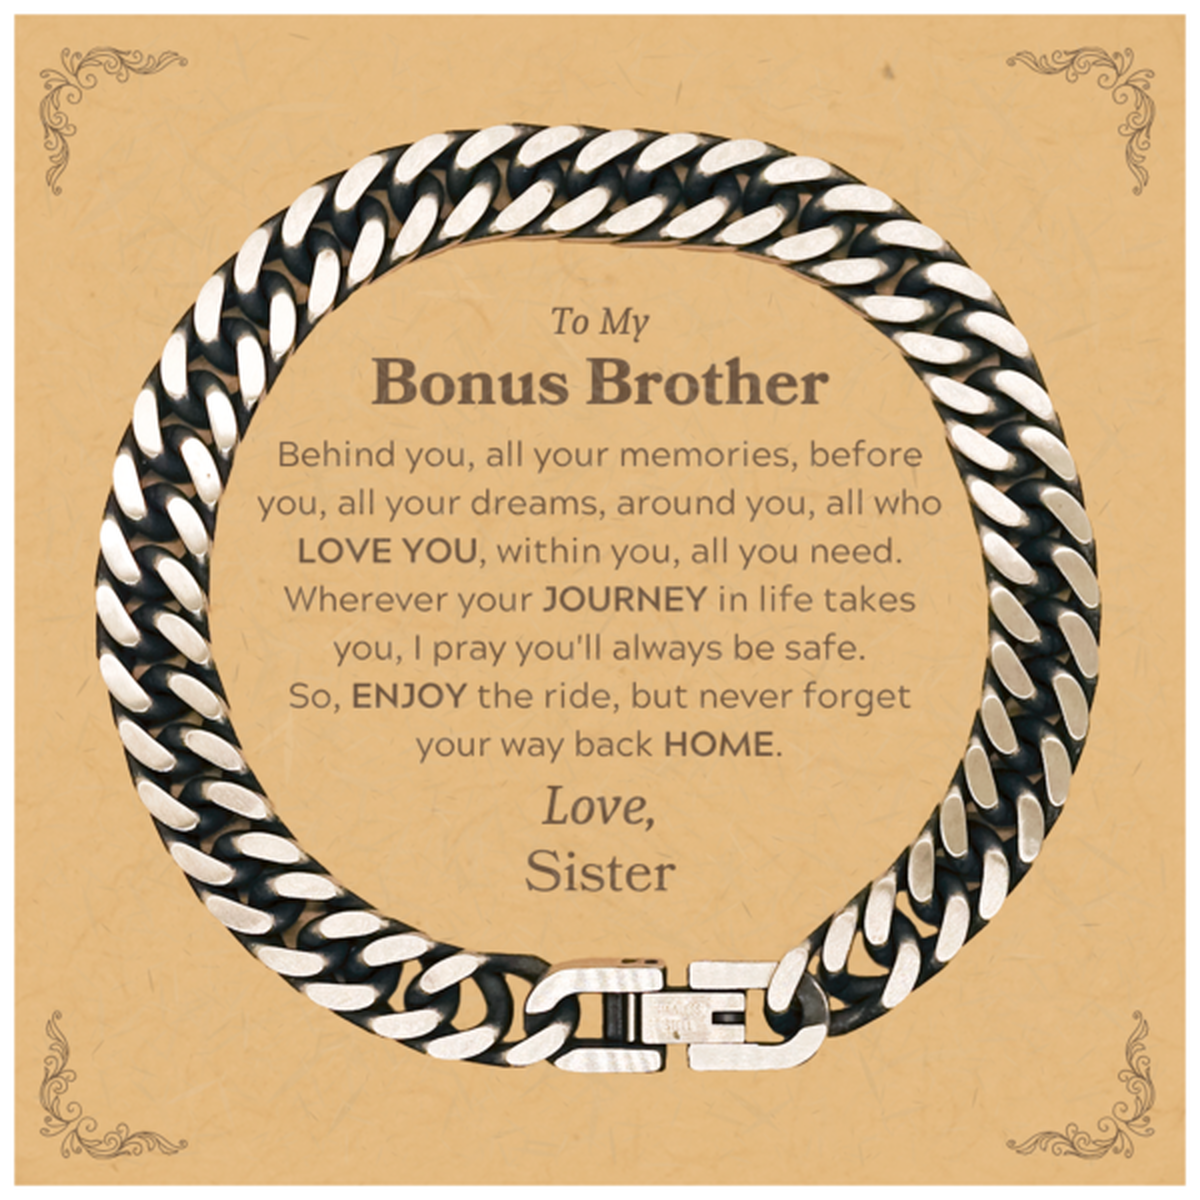 To My Bonus Brother Graduation Gifts from Sister, Bonus Brother Cuban Link Chain Bracelet Christmas Birthday Gifts for Bonus Brother Behind you, all your memories, before you, all your dreams. Love, Sister